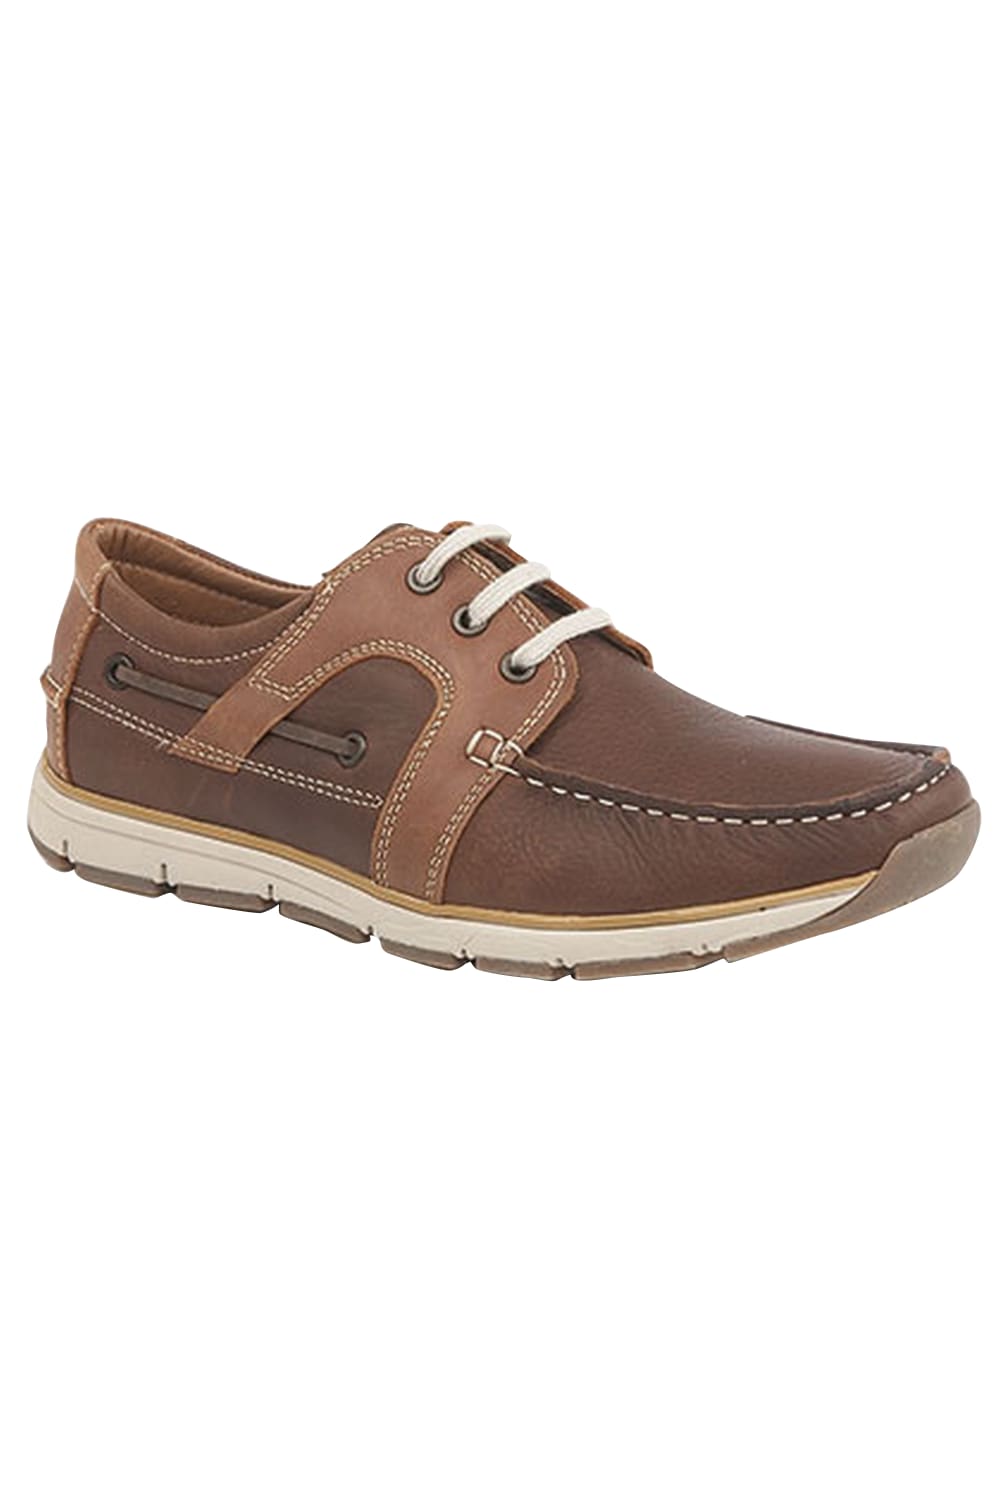 Superlight Mens 3 Eye Apron Tab Moccasin Leisure Shoes (Brown)